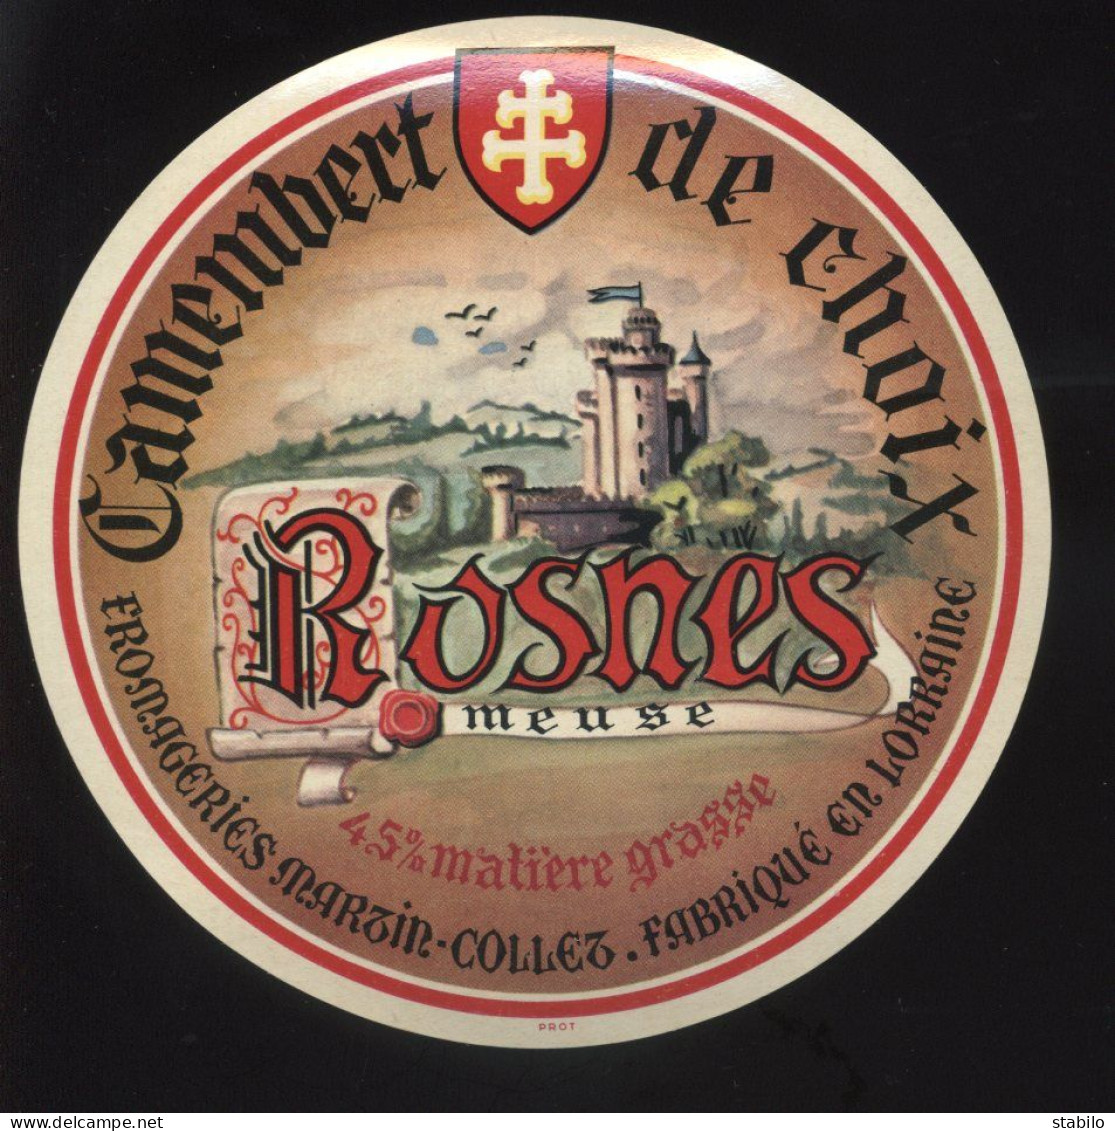 ETIQUETTE DE FROMAGE - CAMEMBERT ROSNES - FROMAGERIE MARTIN-COLLET, ROSNES (MEUSE) - Cheese